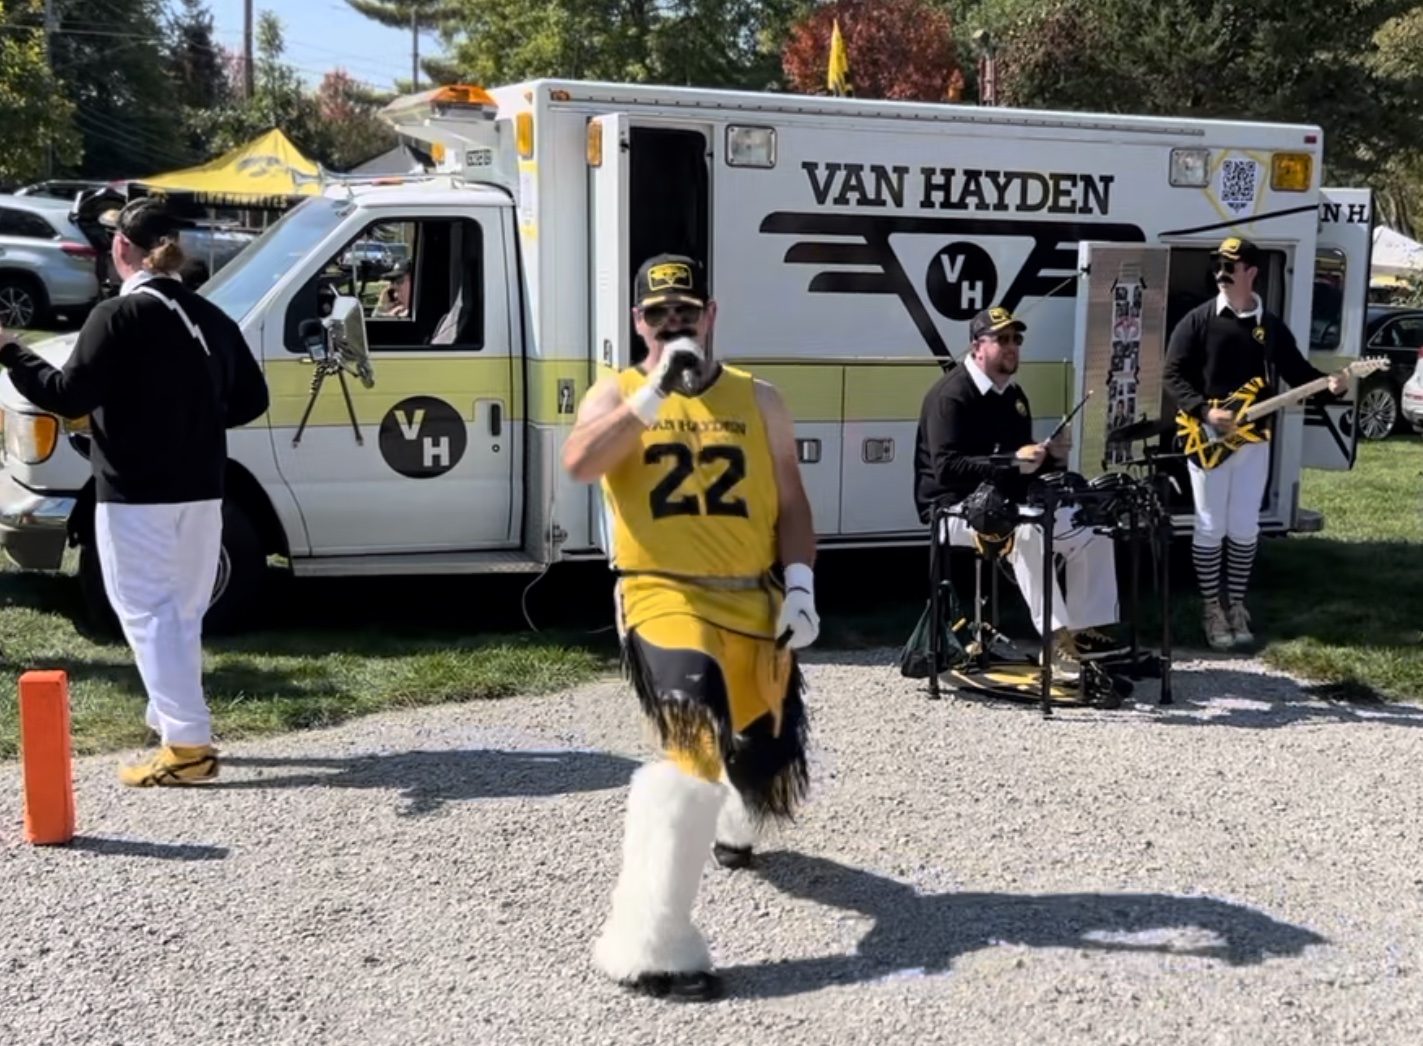 Van Hayden Band performing in front of the Vanbulance at a tailgate for the Iowa vs. Michigan State game